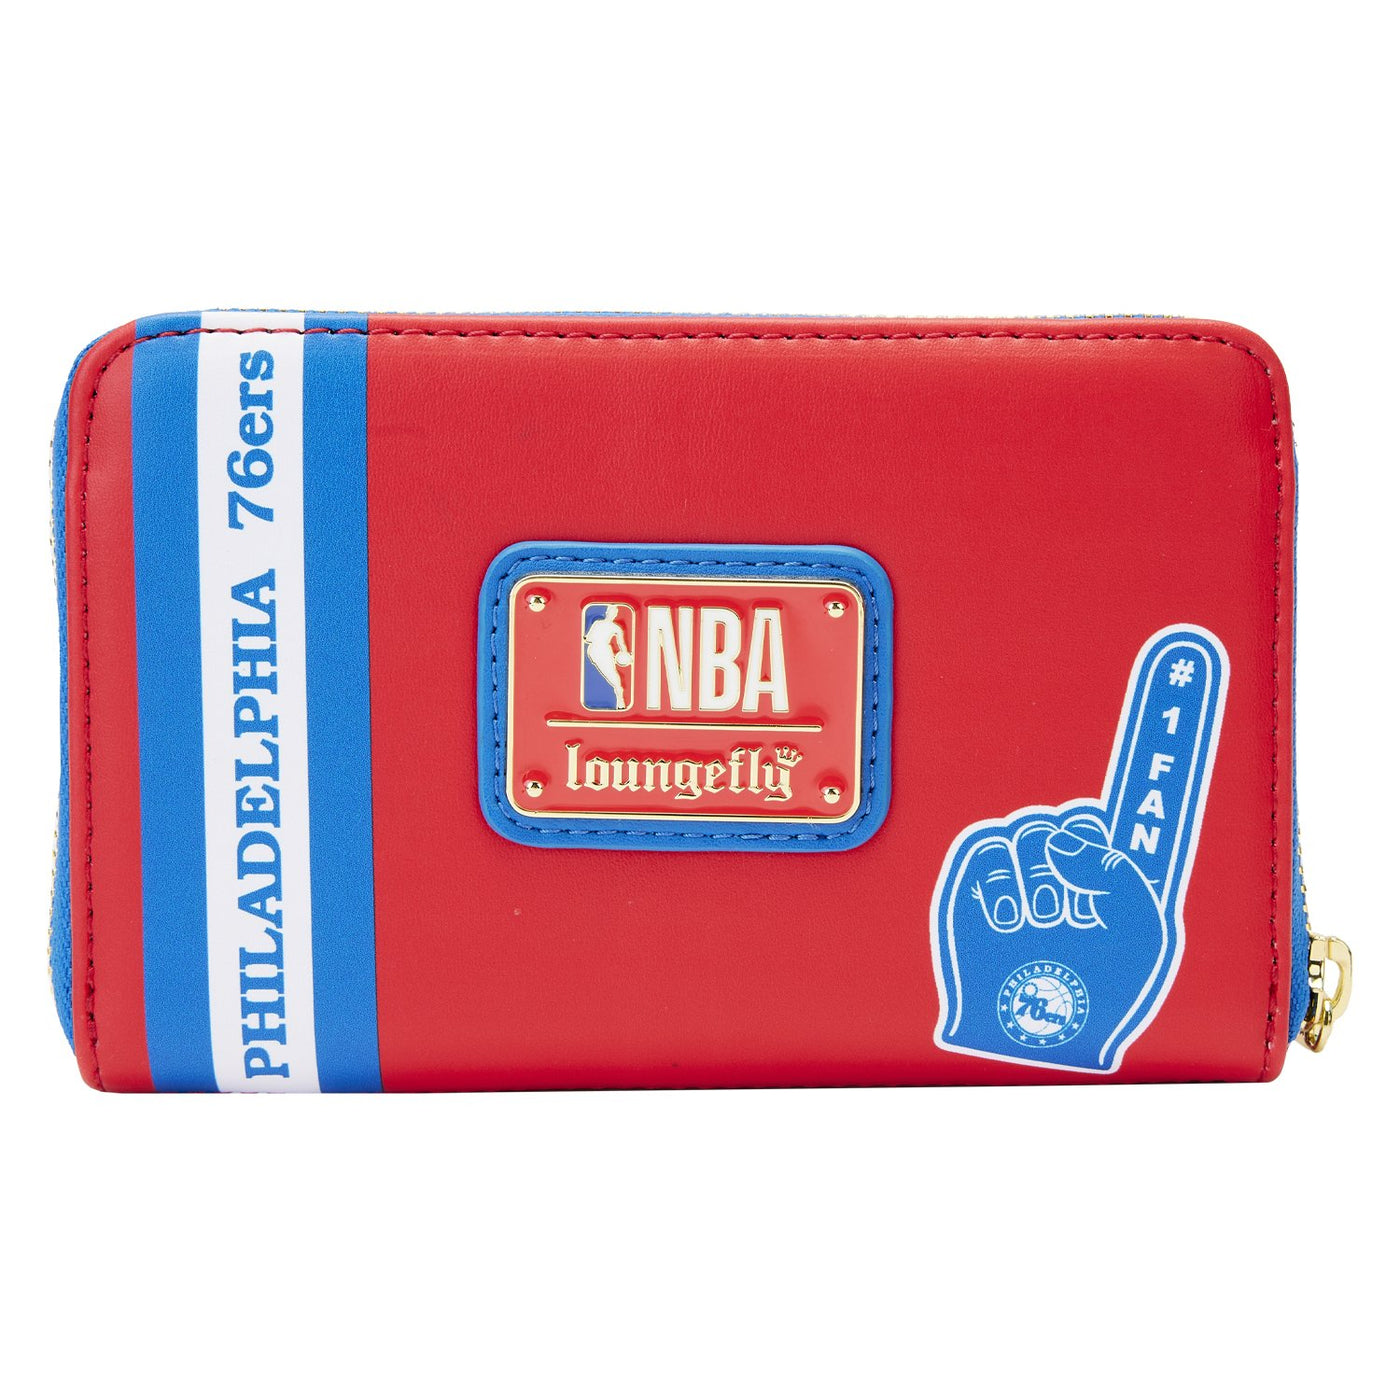 Buy NBA Golden State Warriors Patch Icons Mini Backpack at Loungefly.